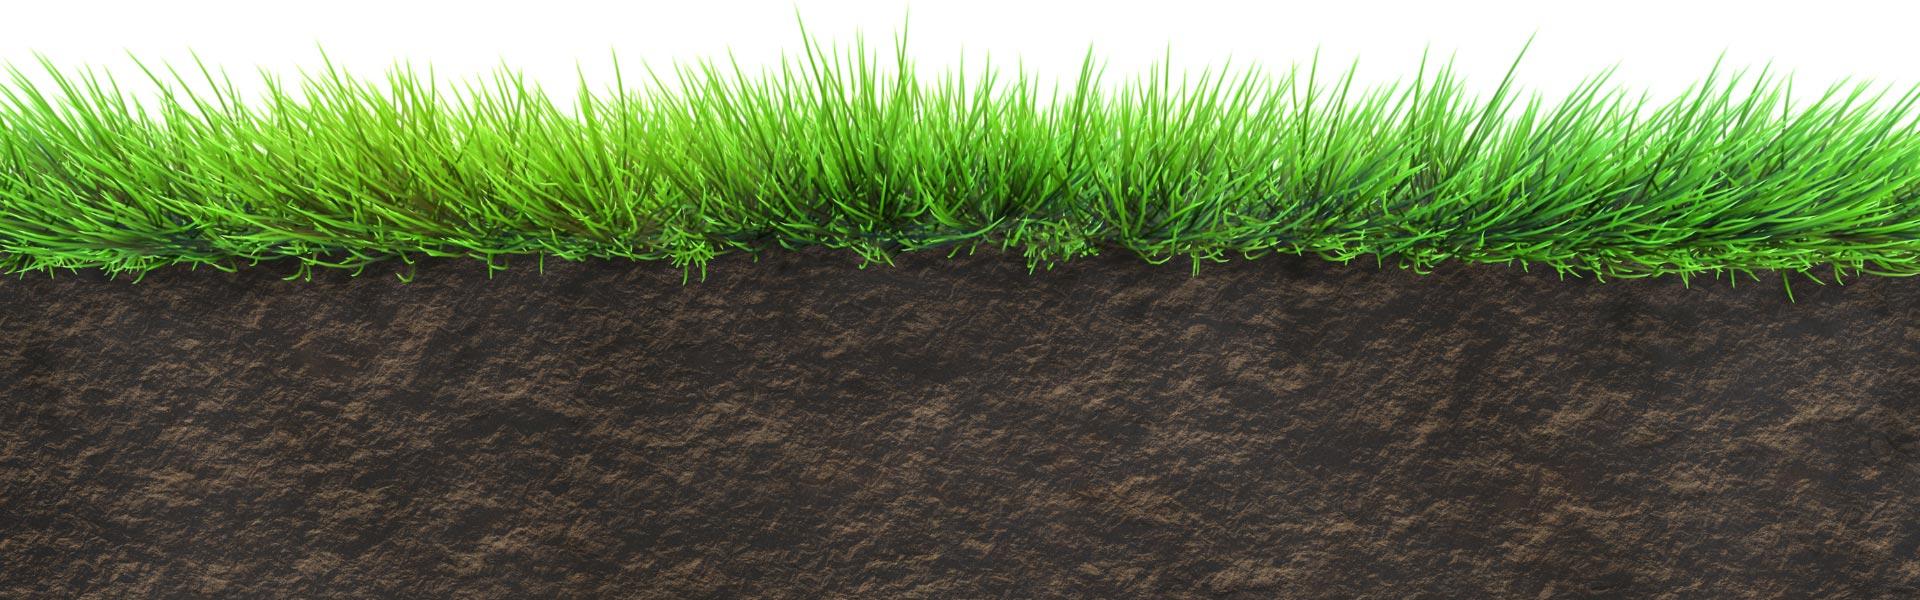 Cutaway of grass and soil